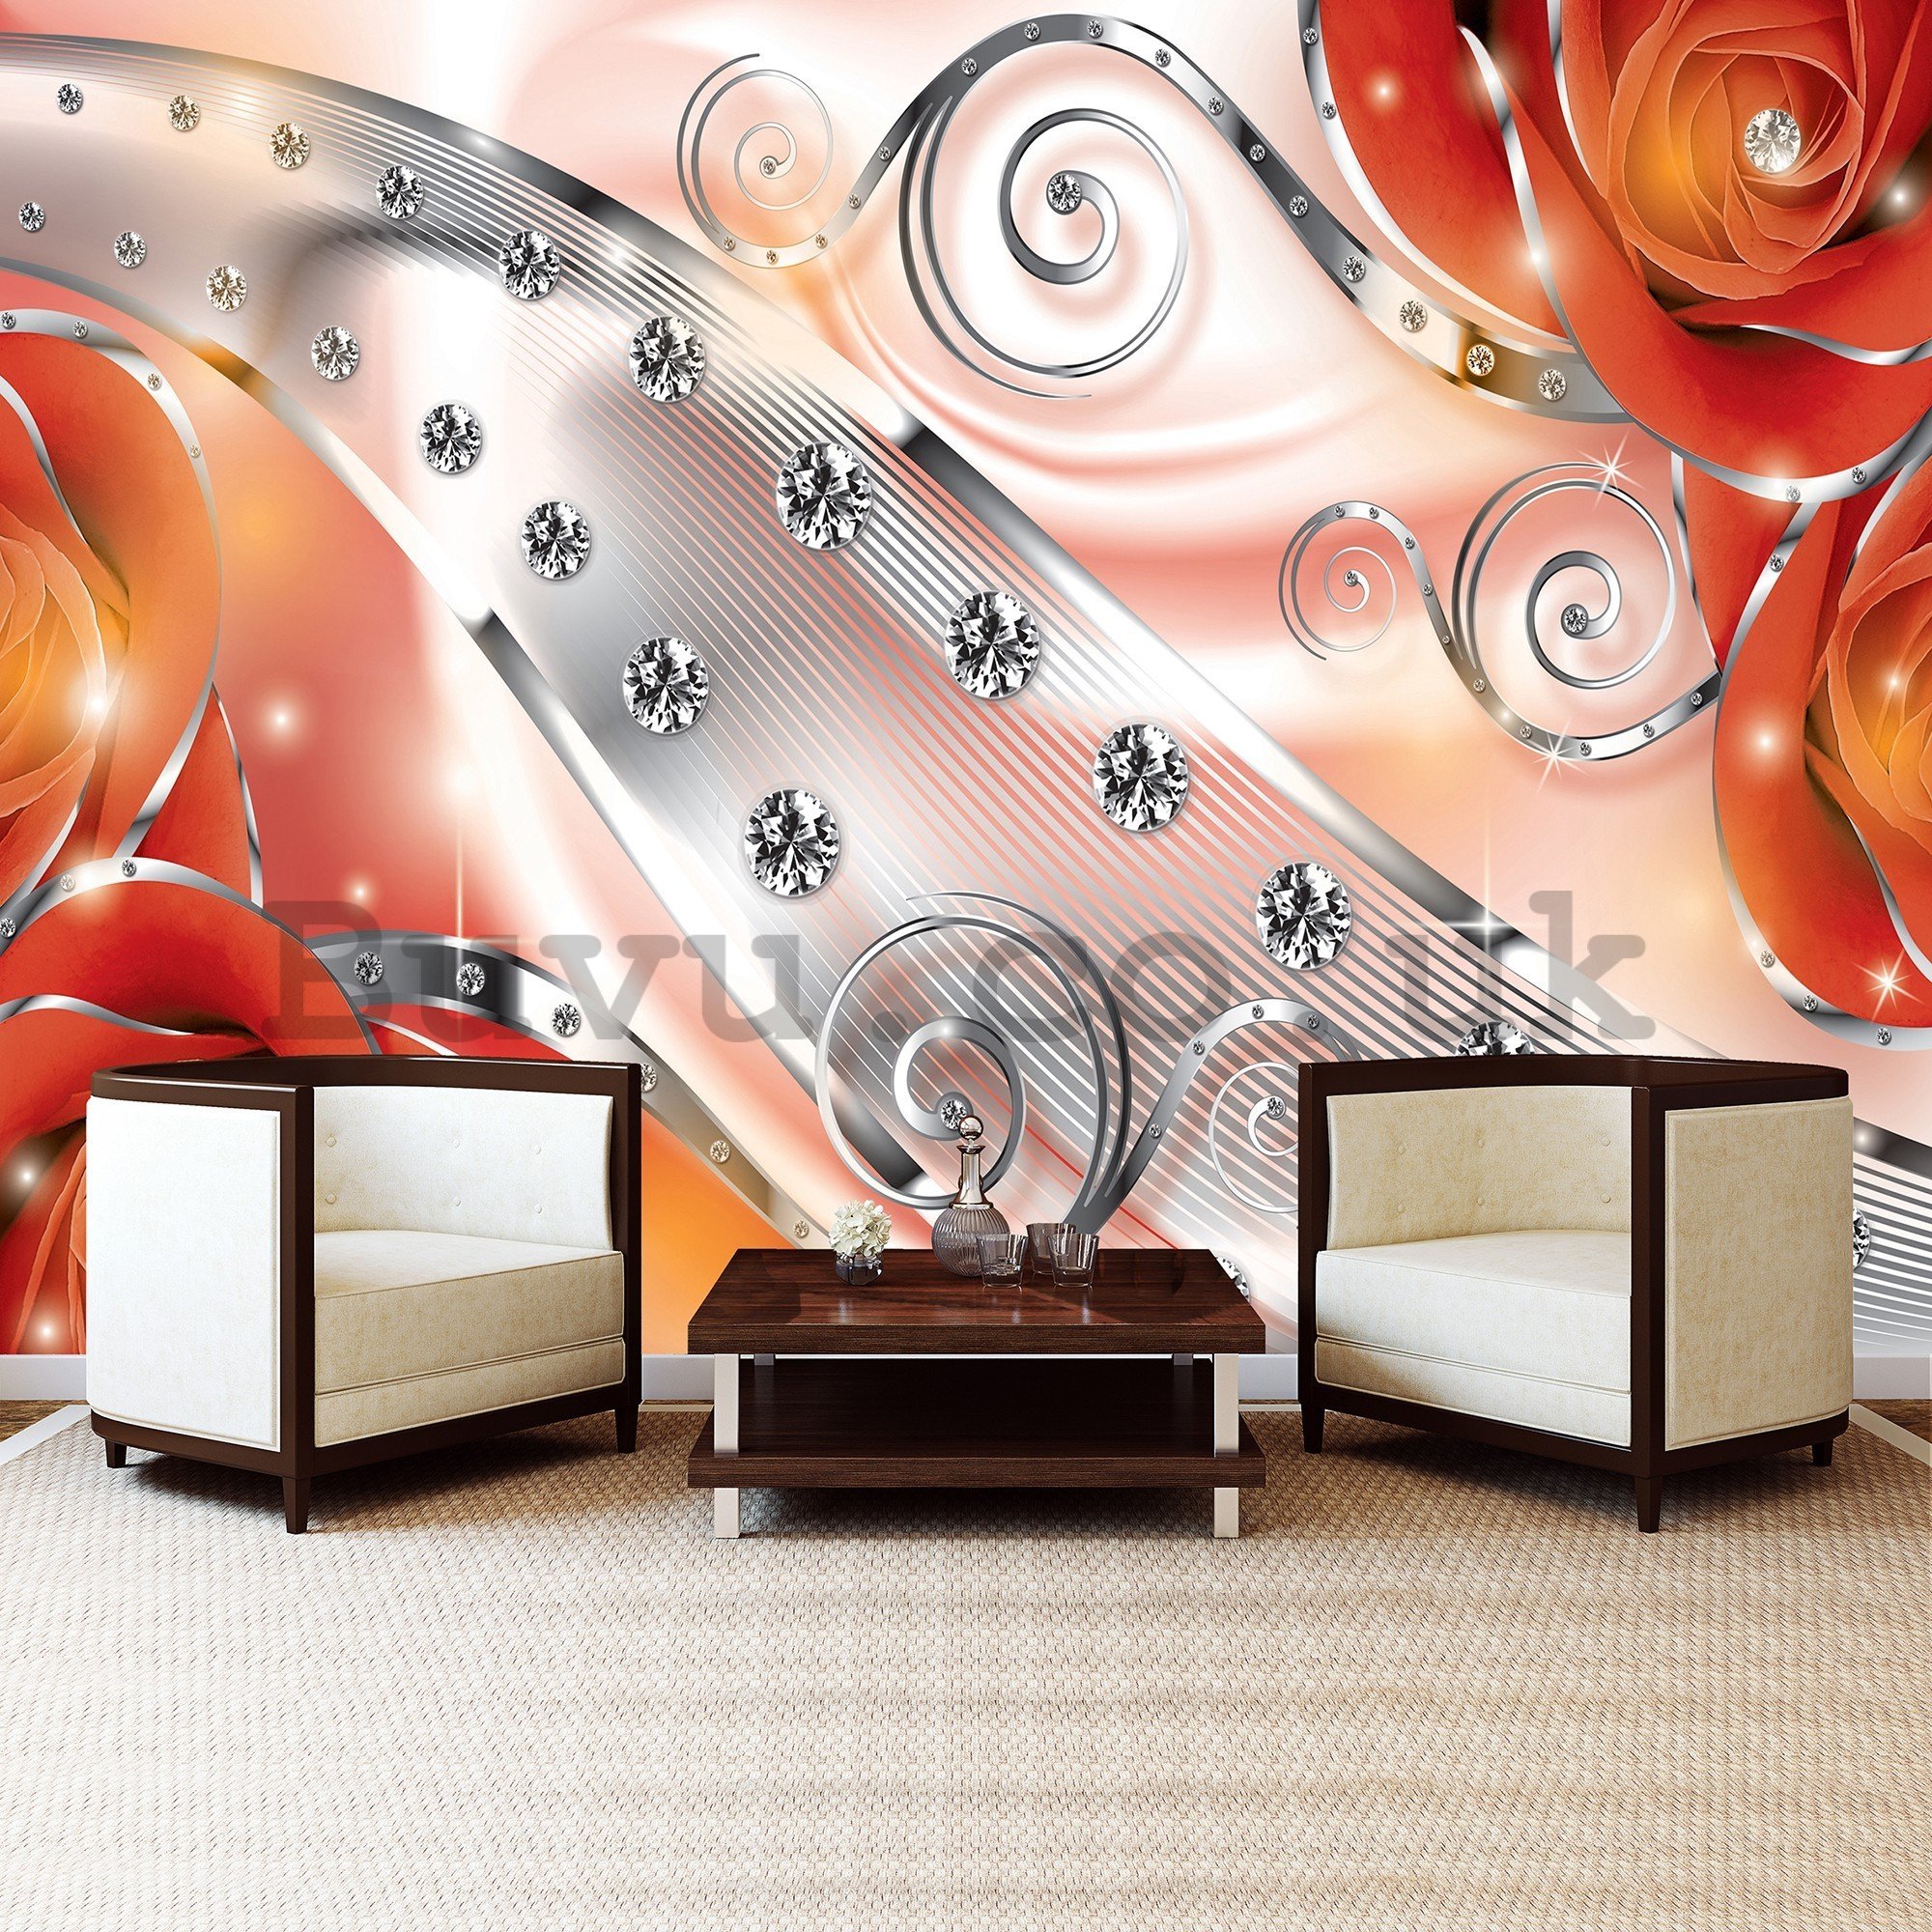 Wall mural vlies: Luxurious abstract (red) - 416x254 cm